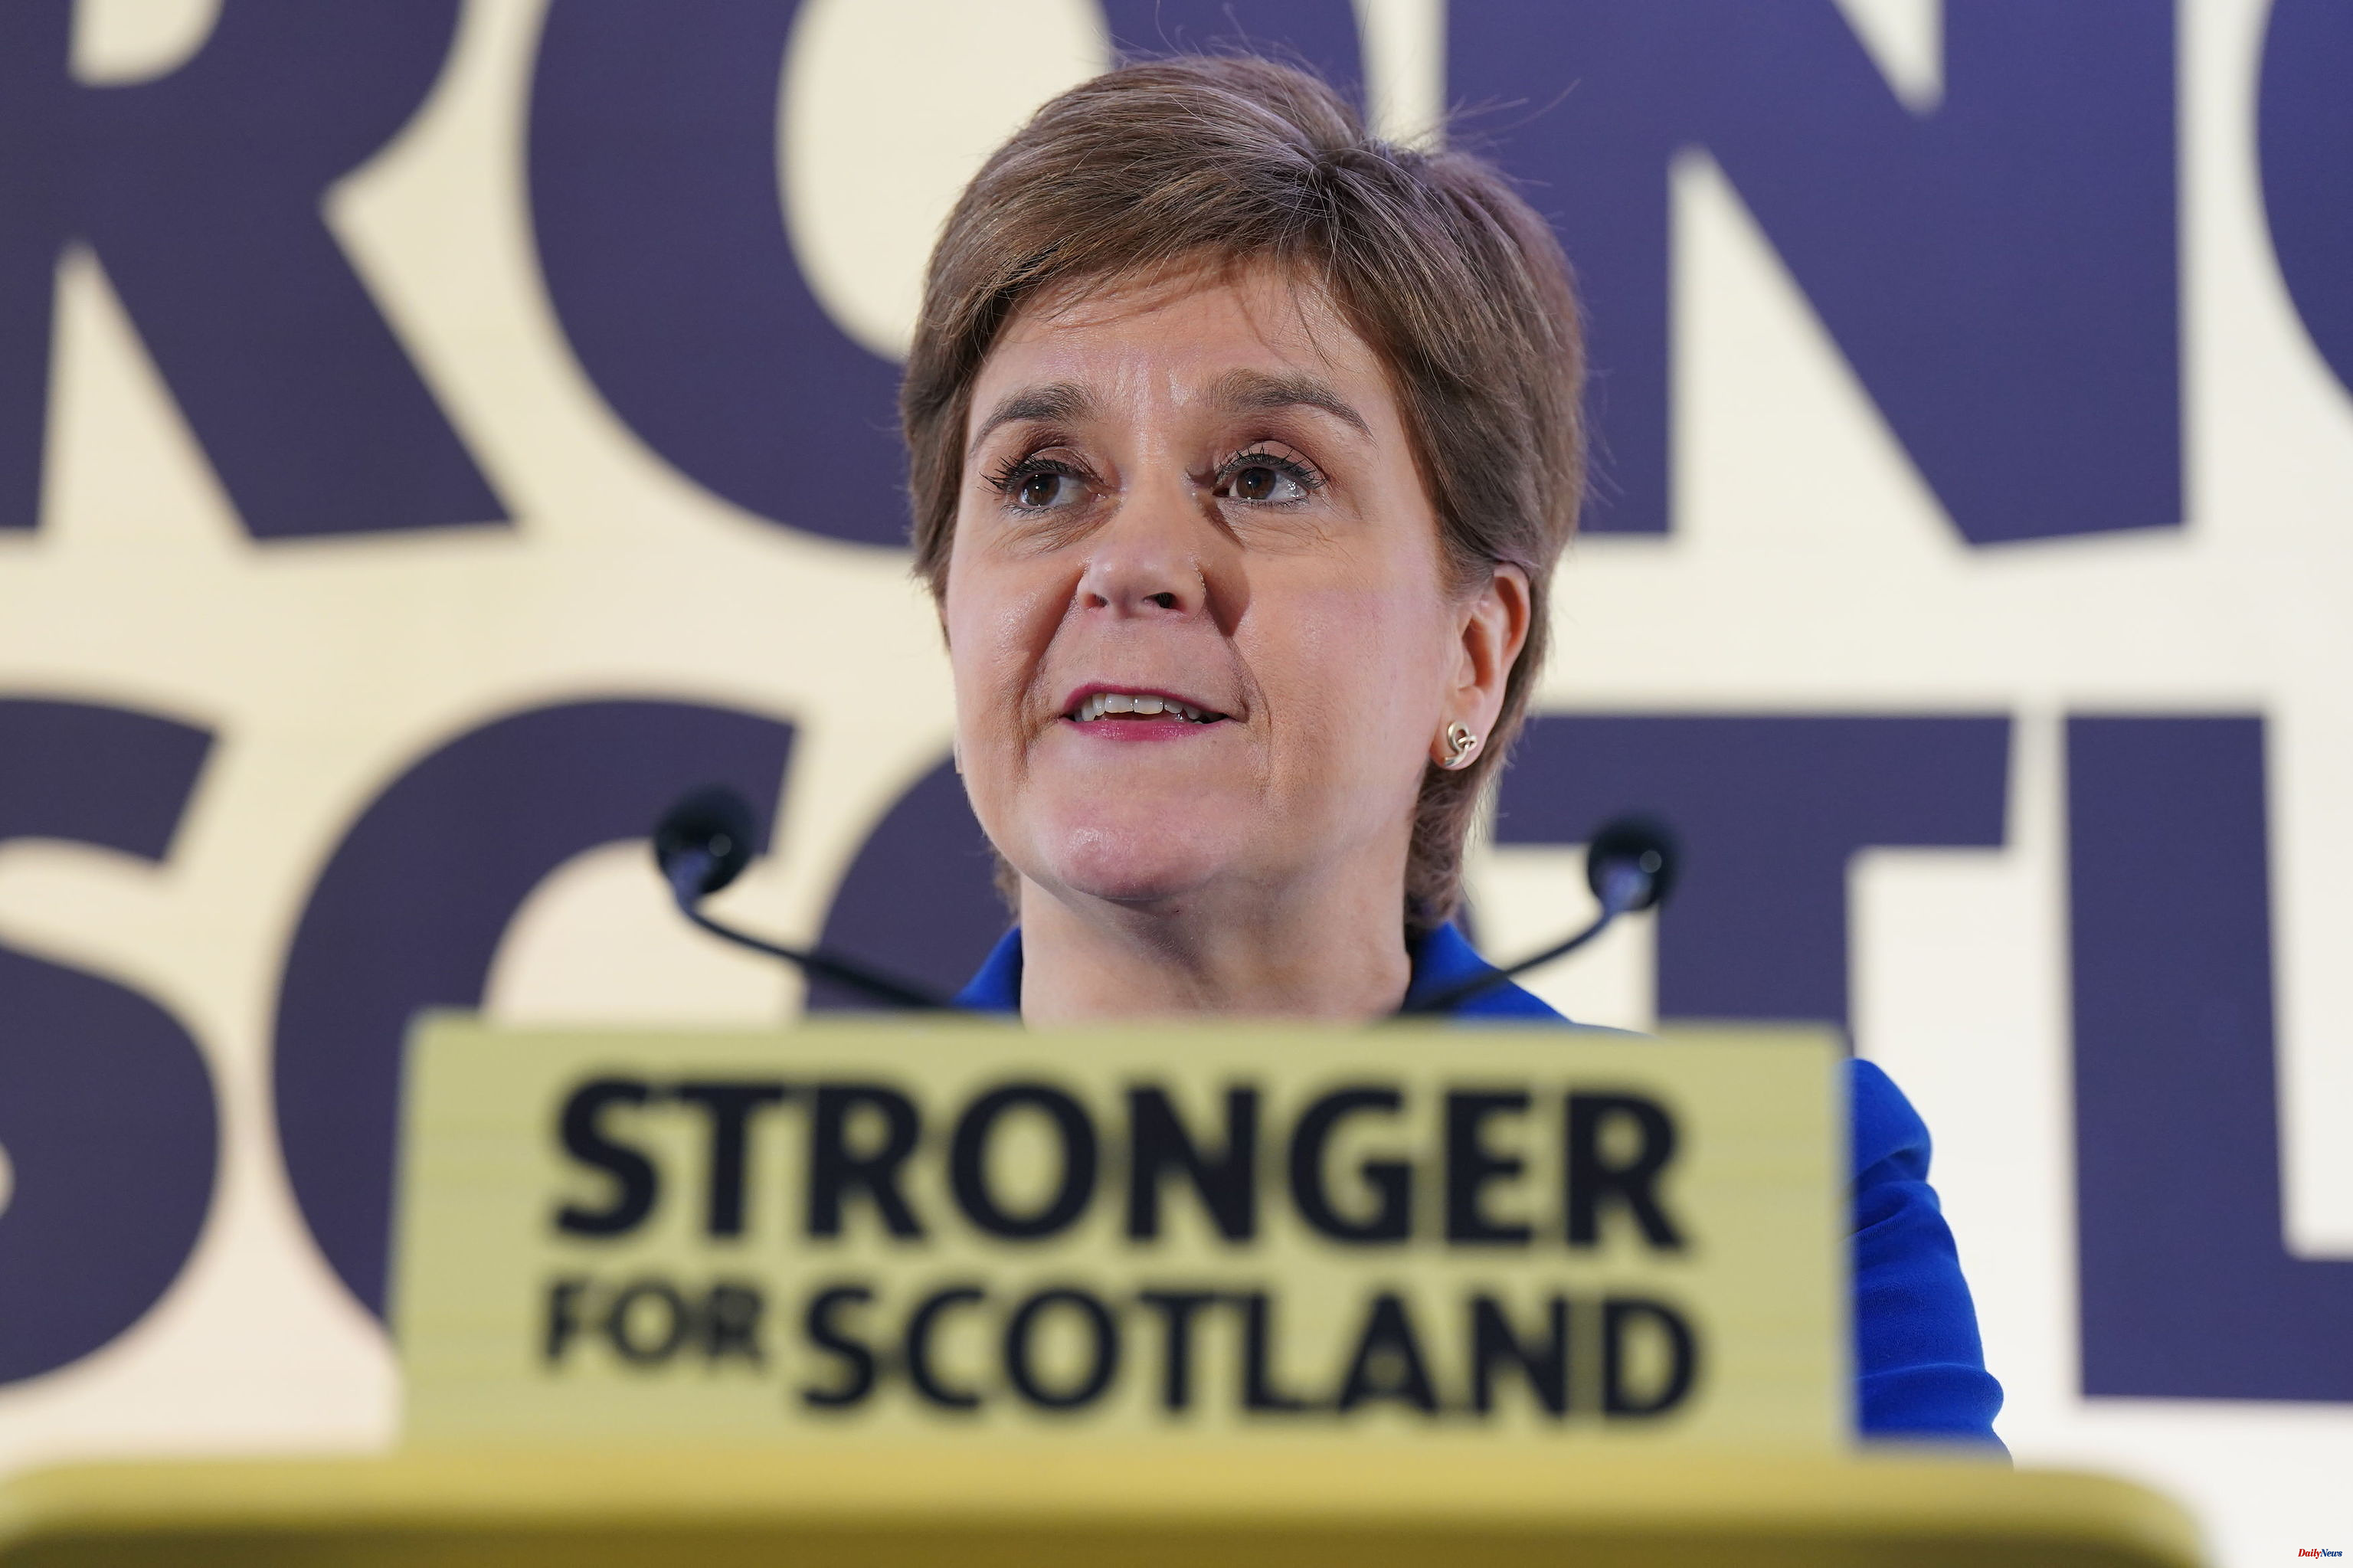 United Kingdom Sturgeon supports the new strategy of the Scottish independence movement